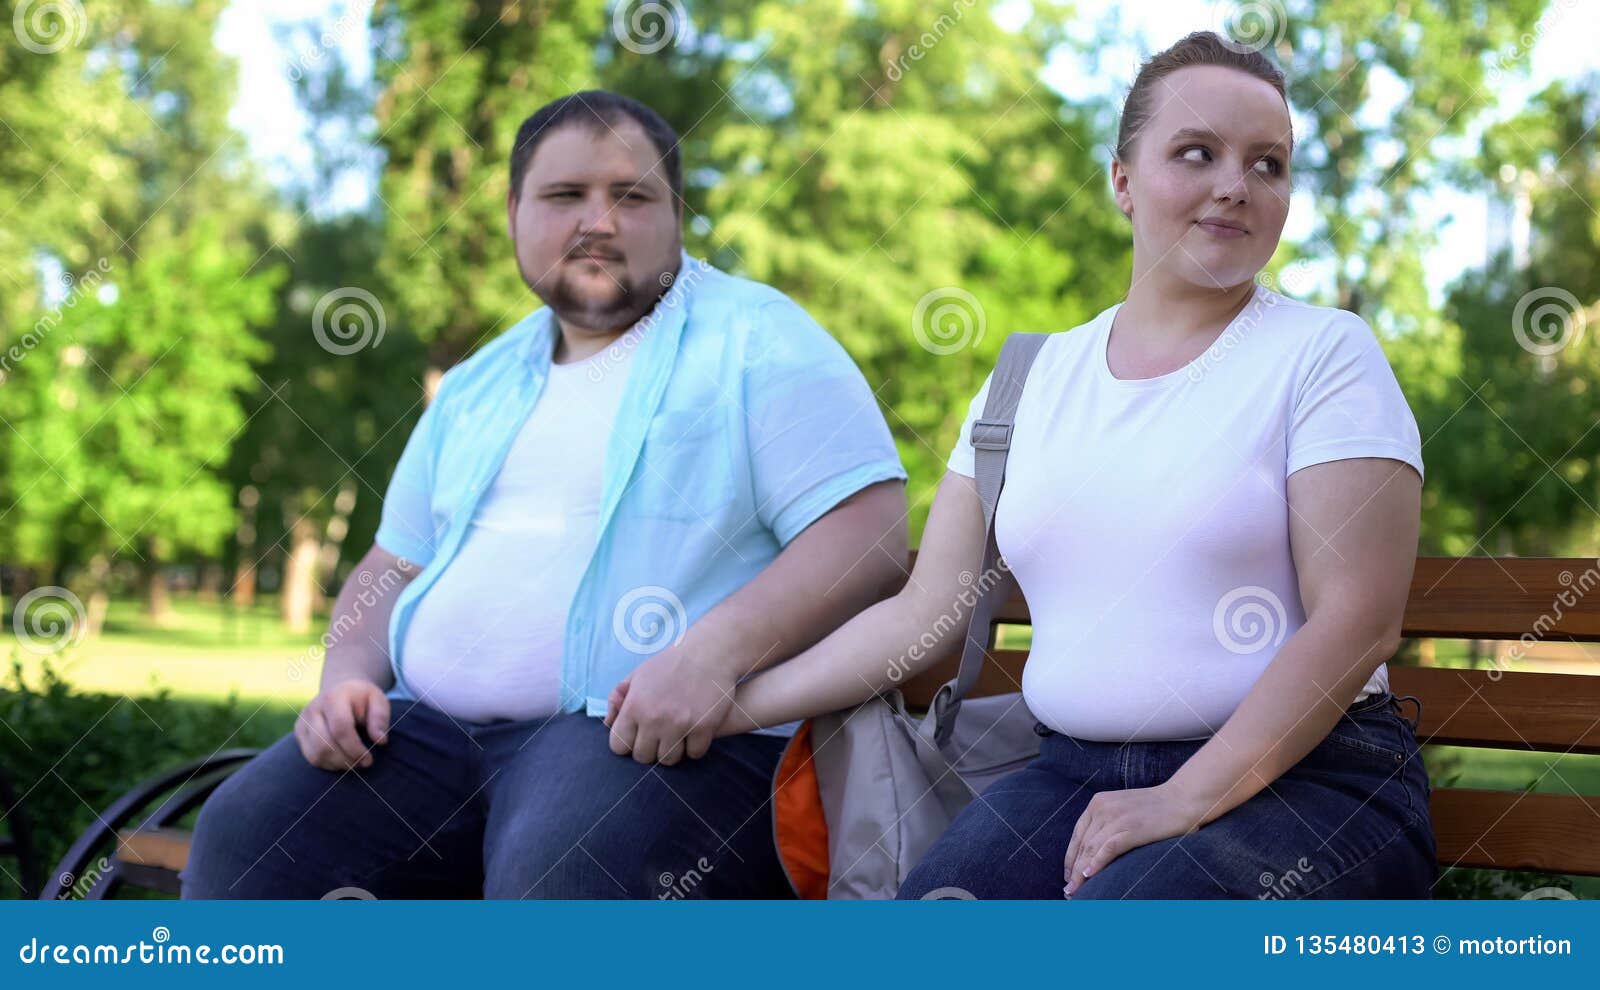 Obese Dating | Best Obese Dating Sit…